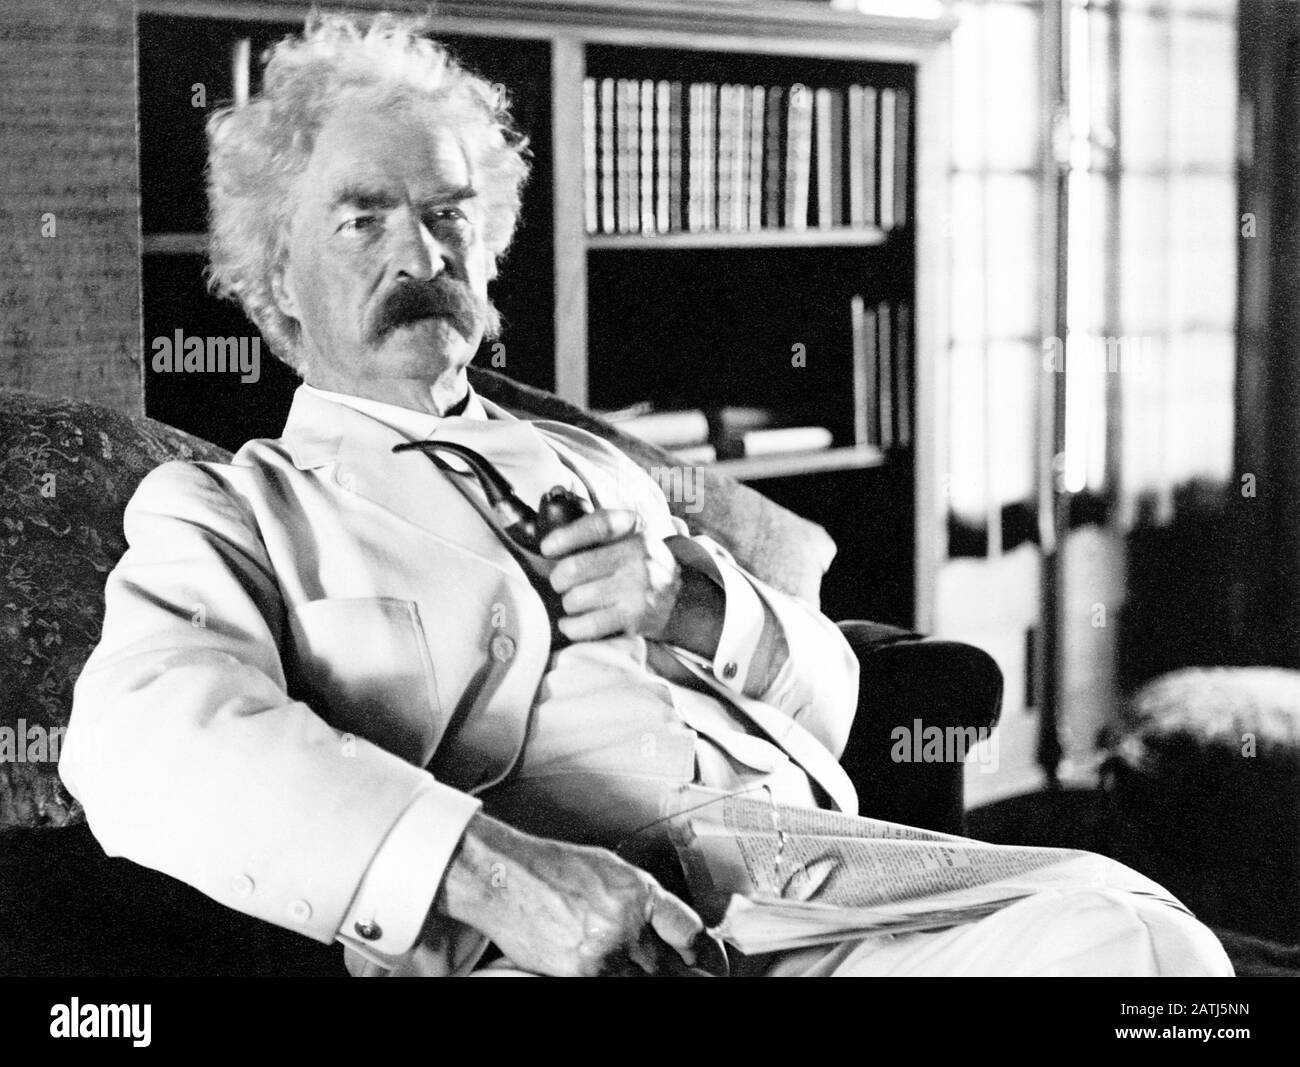 Vintage portrait photo of American writer and humourist Samuel Langhorne Clemens (1835 – 1910), better known by his pen name of Mark Twain. Photo circa 1905. Stock Photo